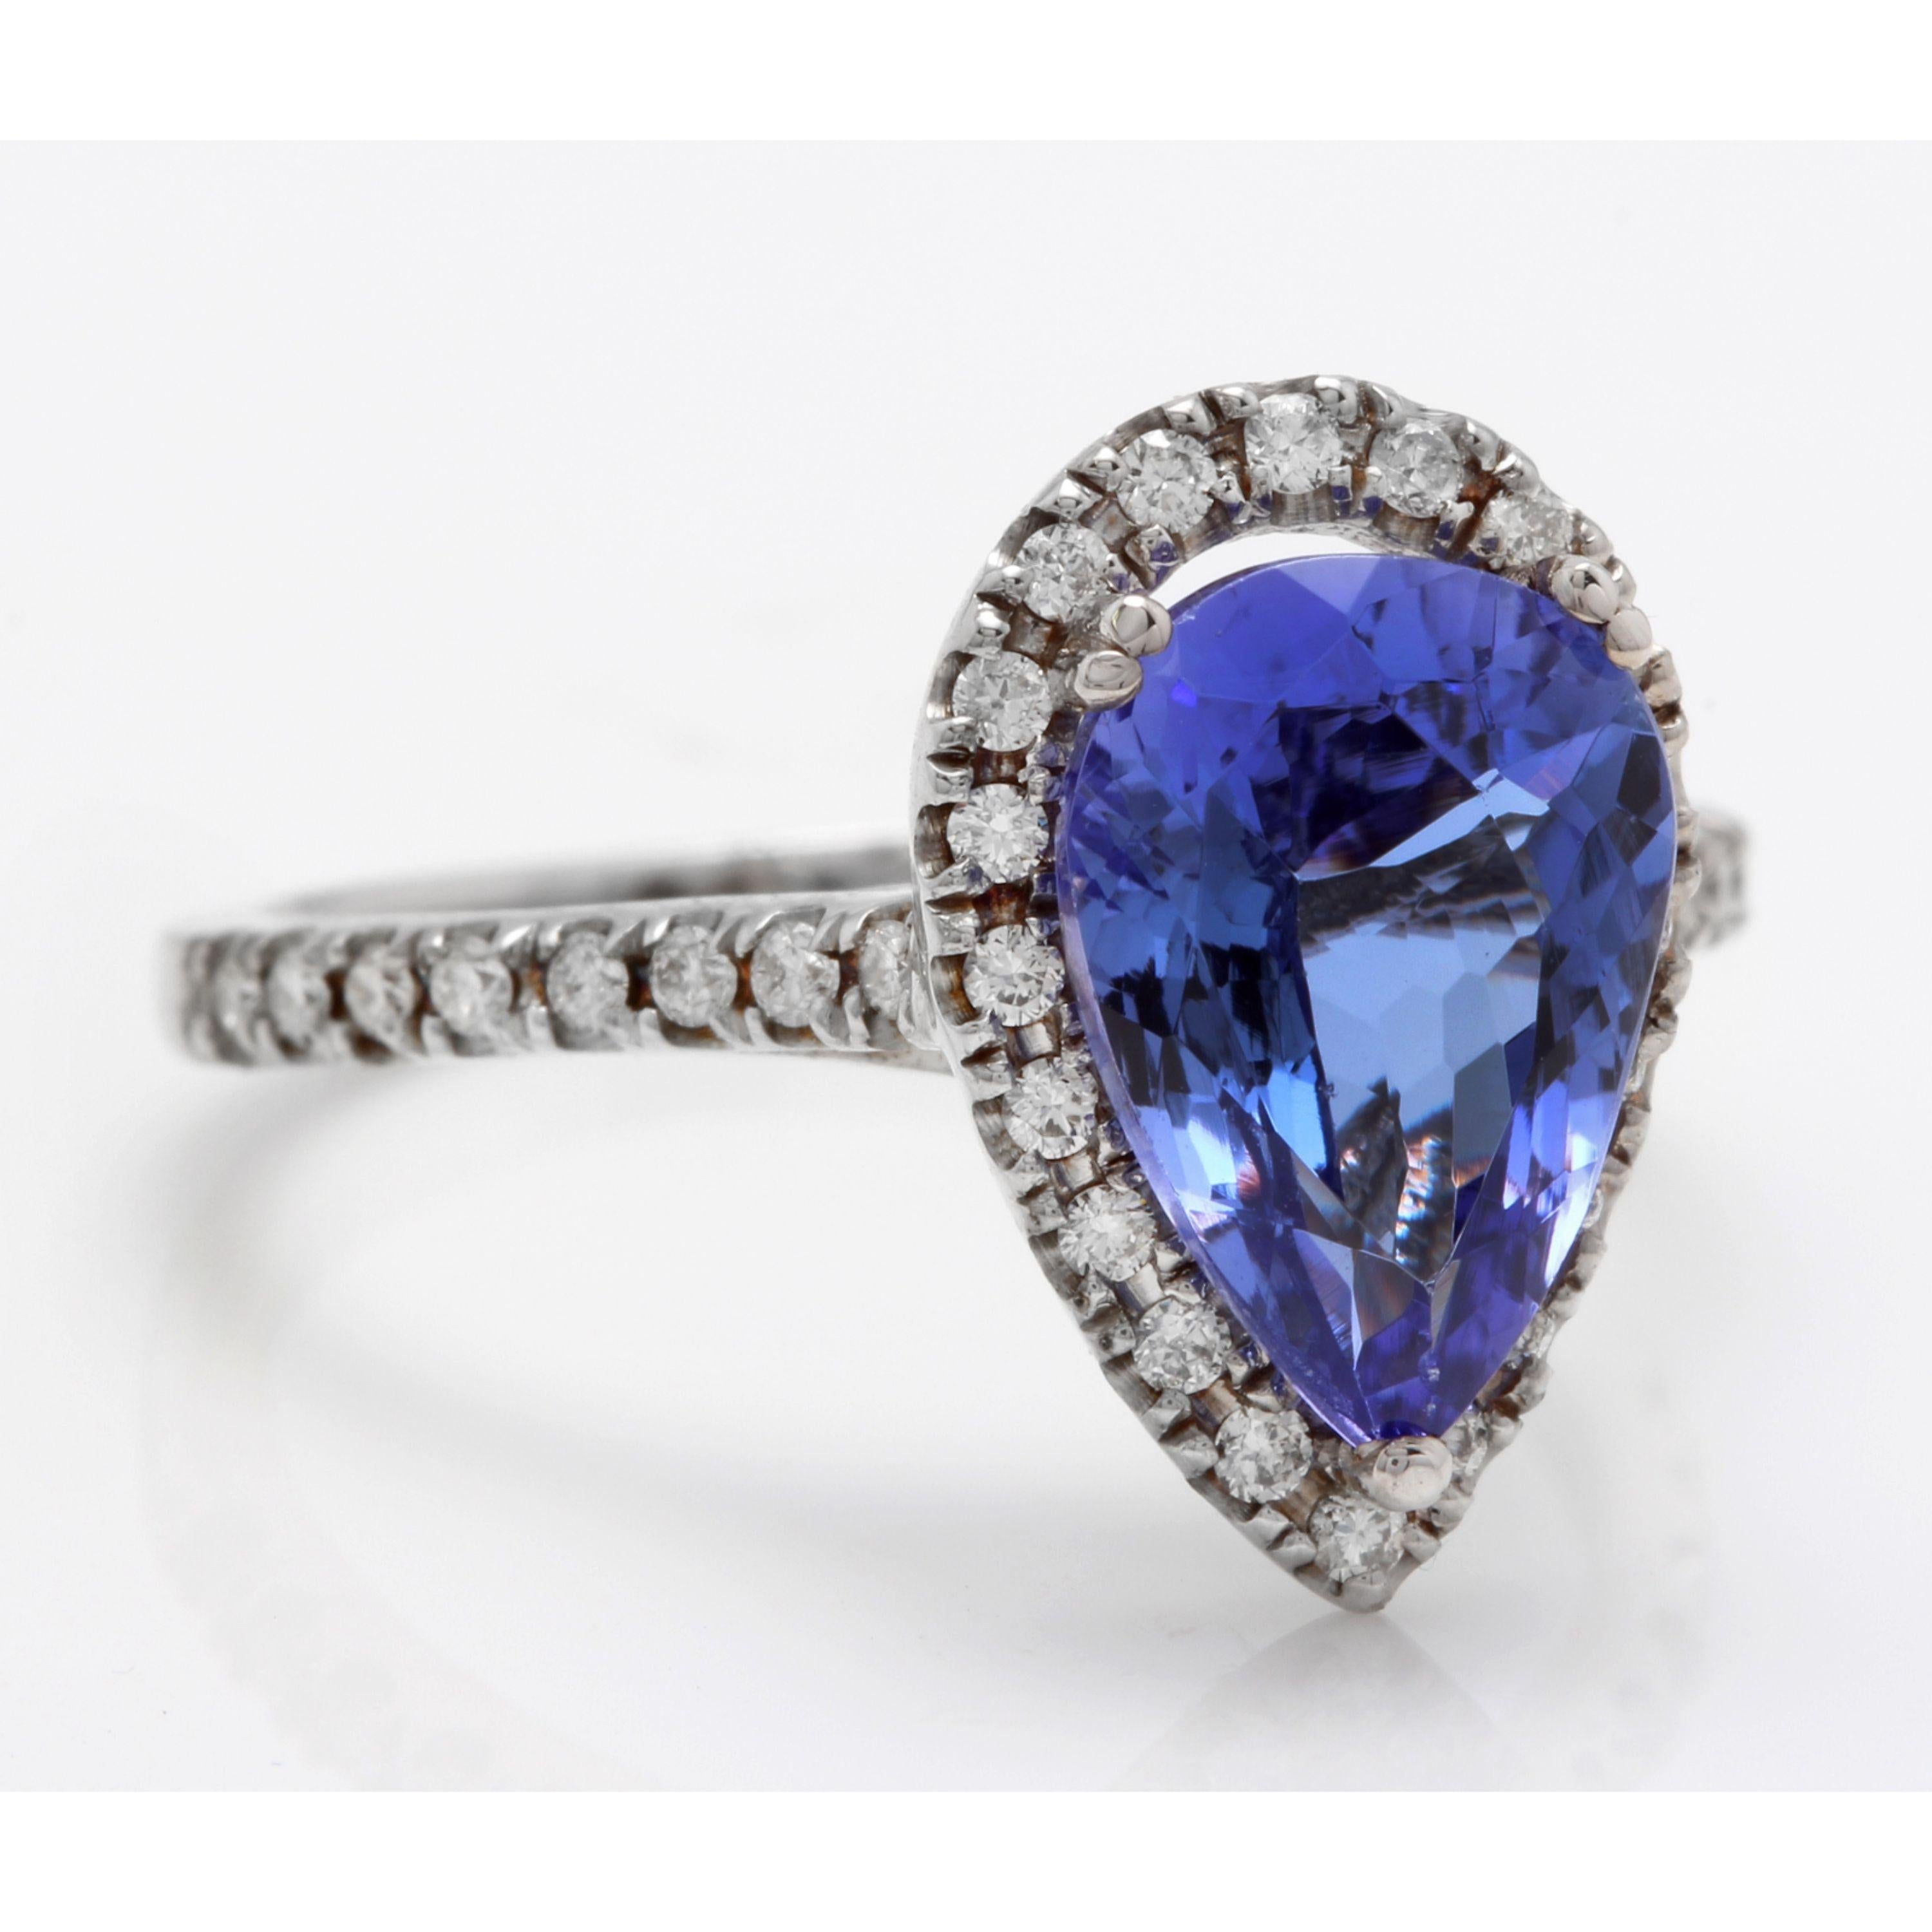 3.10 Carats Natural Very Nice Looking Tanzanite and Diamond 14K Solid White Gold Ring

Total Natural Pear Shaped Tanzanite Weight is: Approx. 2.70 Carats

Tanzanite Measures: Approx. 11.50 x 7.65mm

Natural Round Diamonds Weight: 0.40 Carats (color